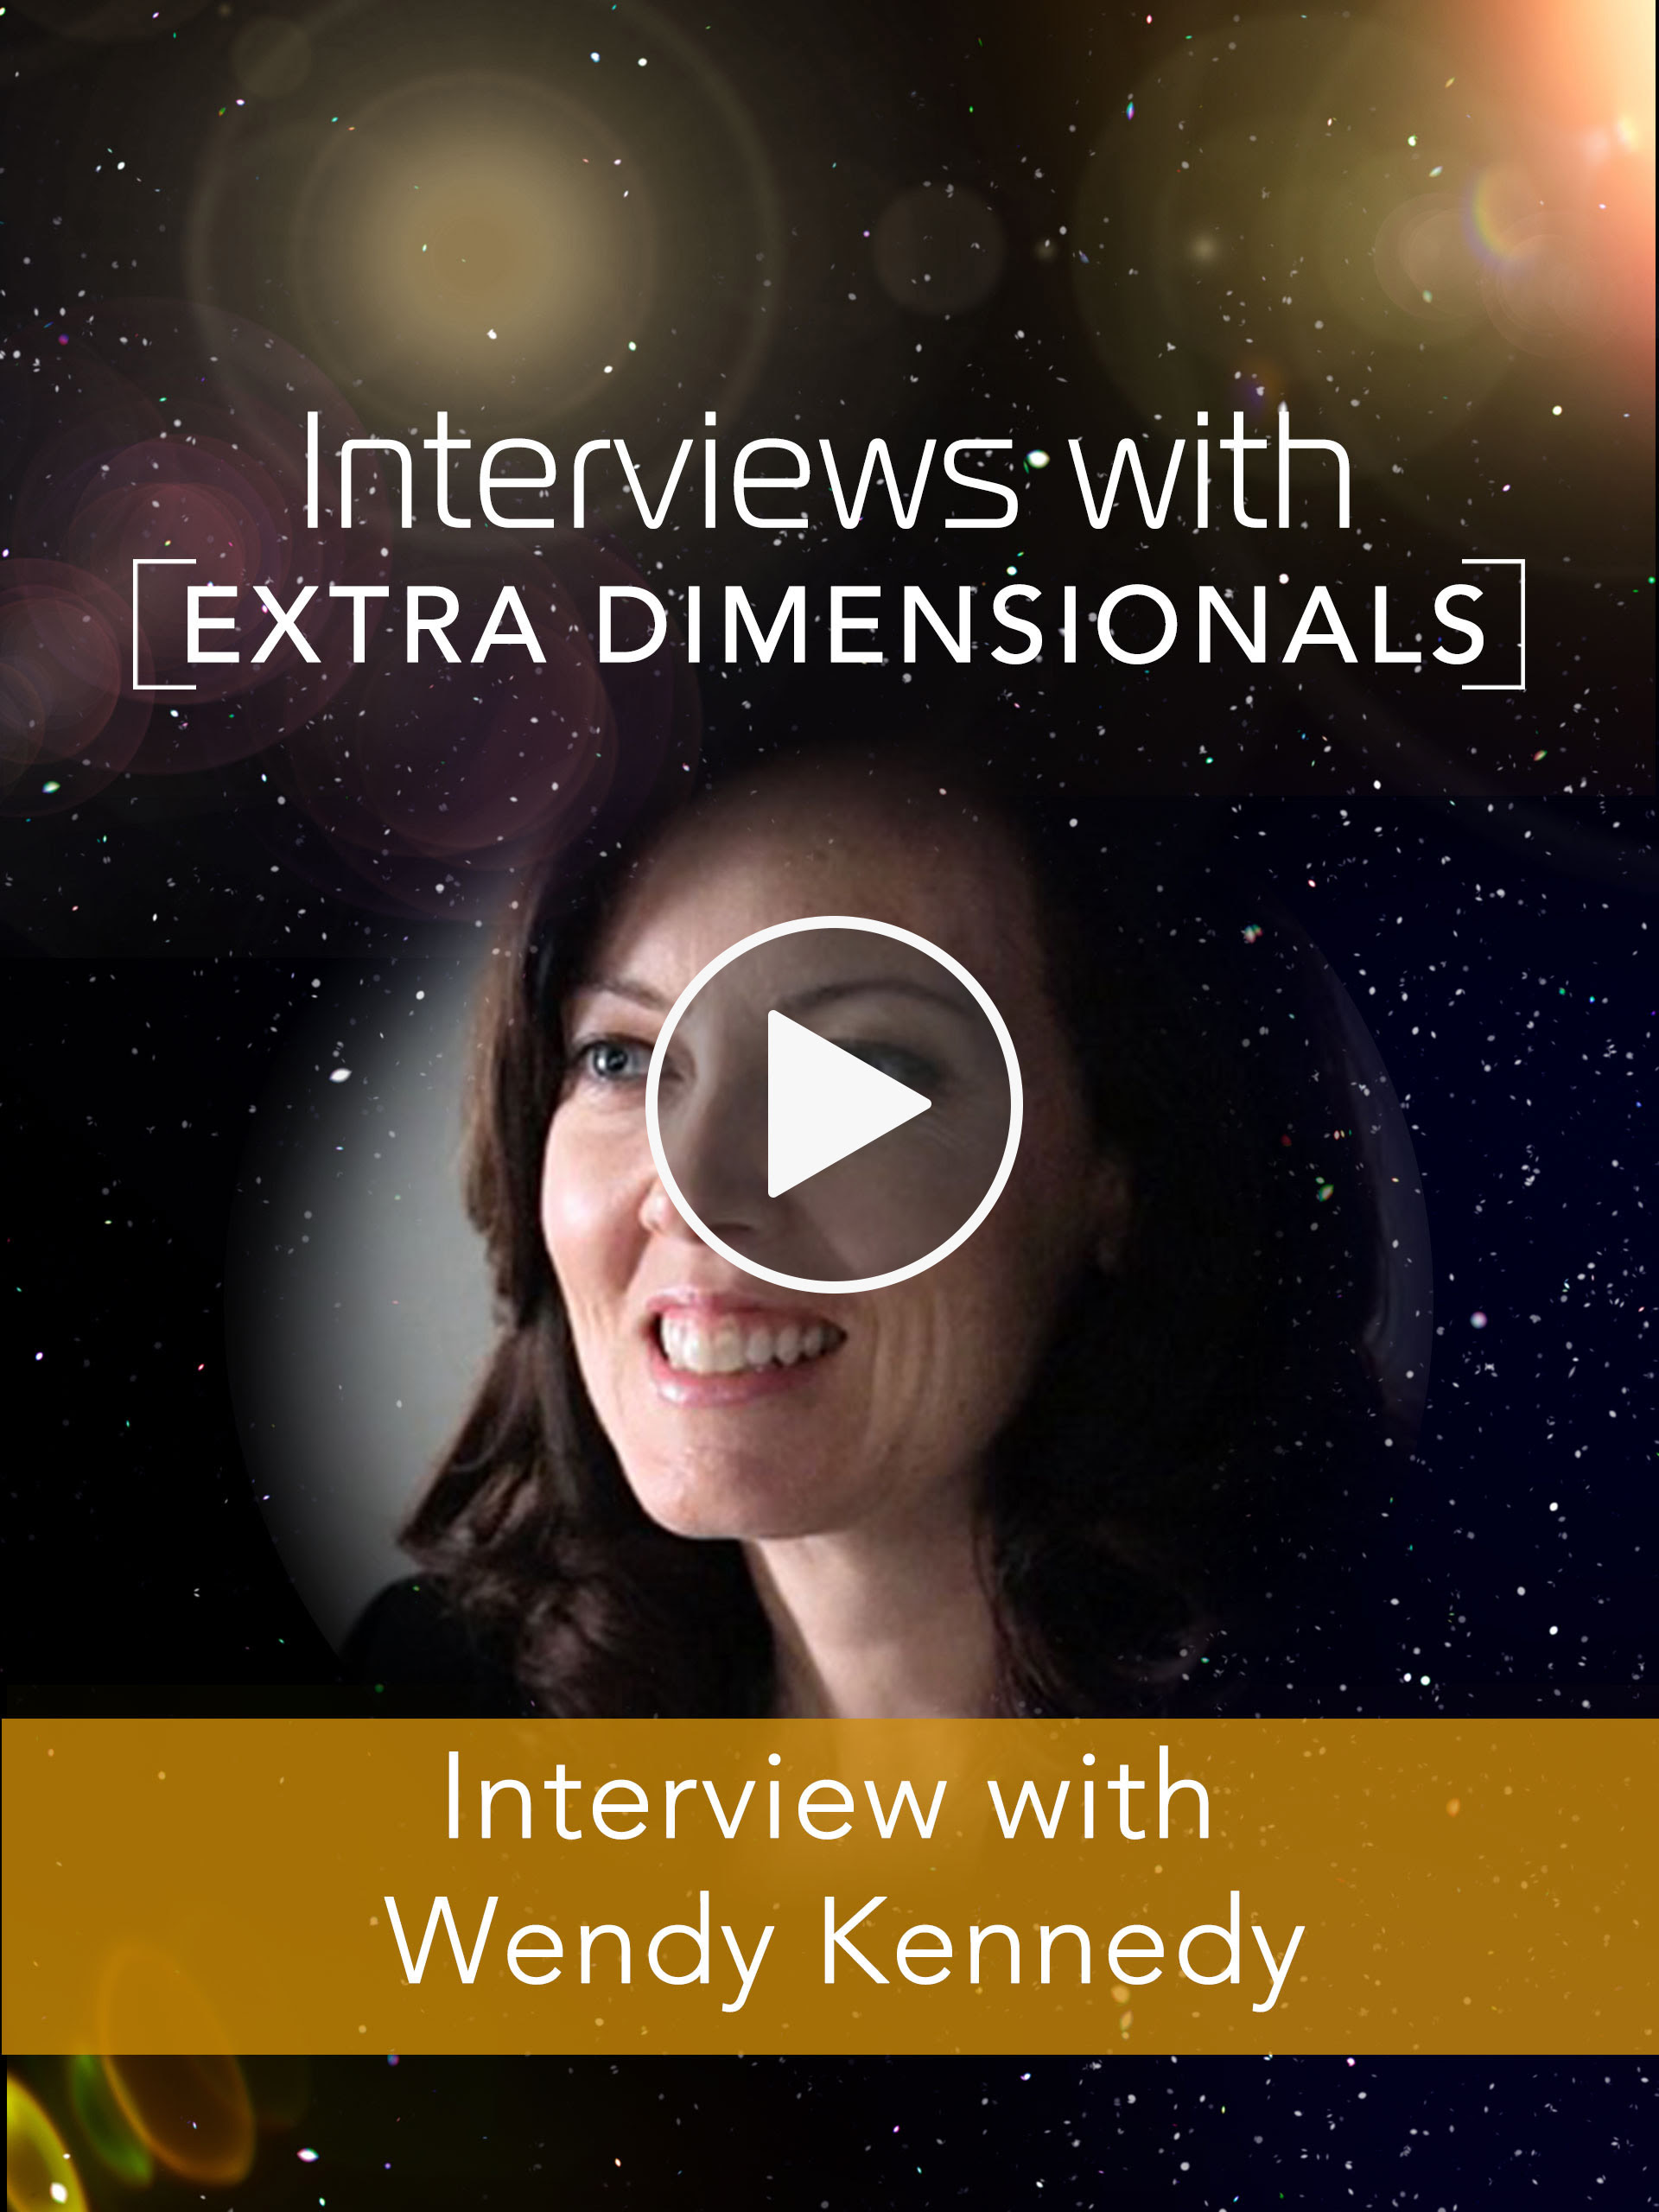 Interviews with Extra-Dimensionals: Wendy Kennedy